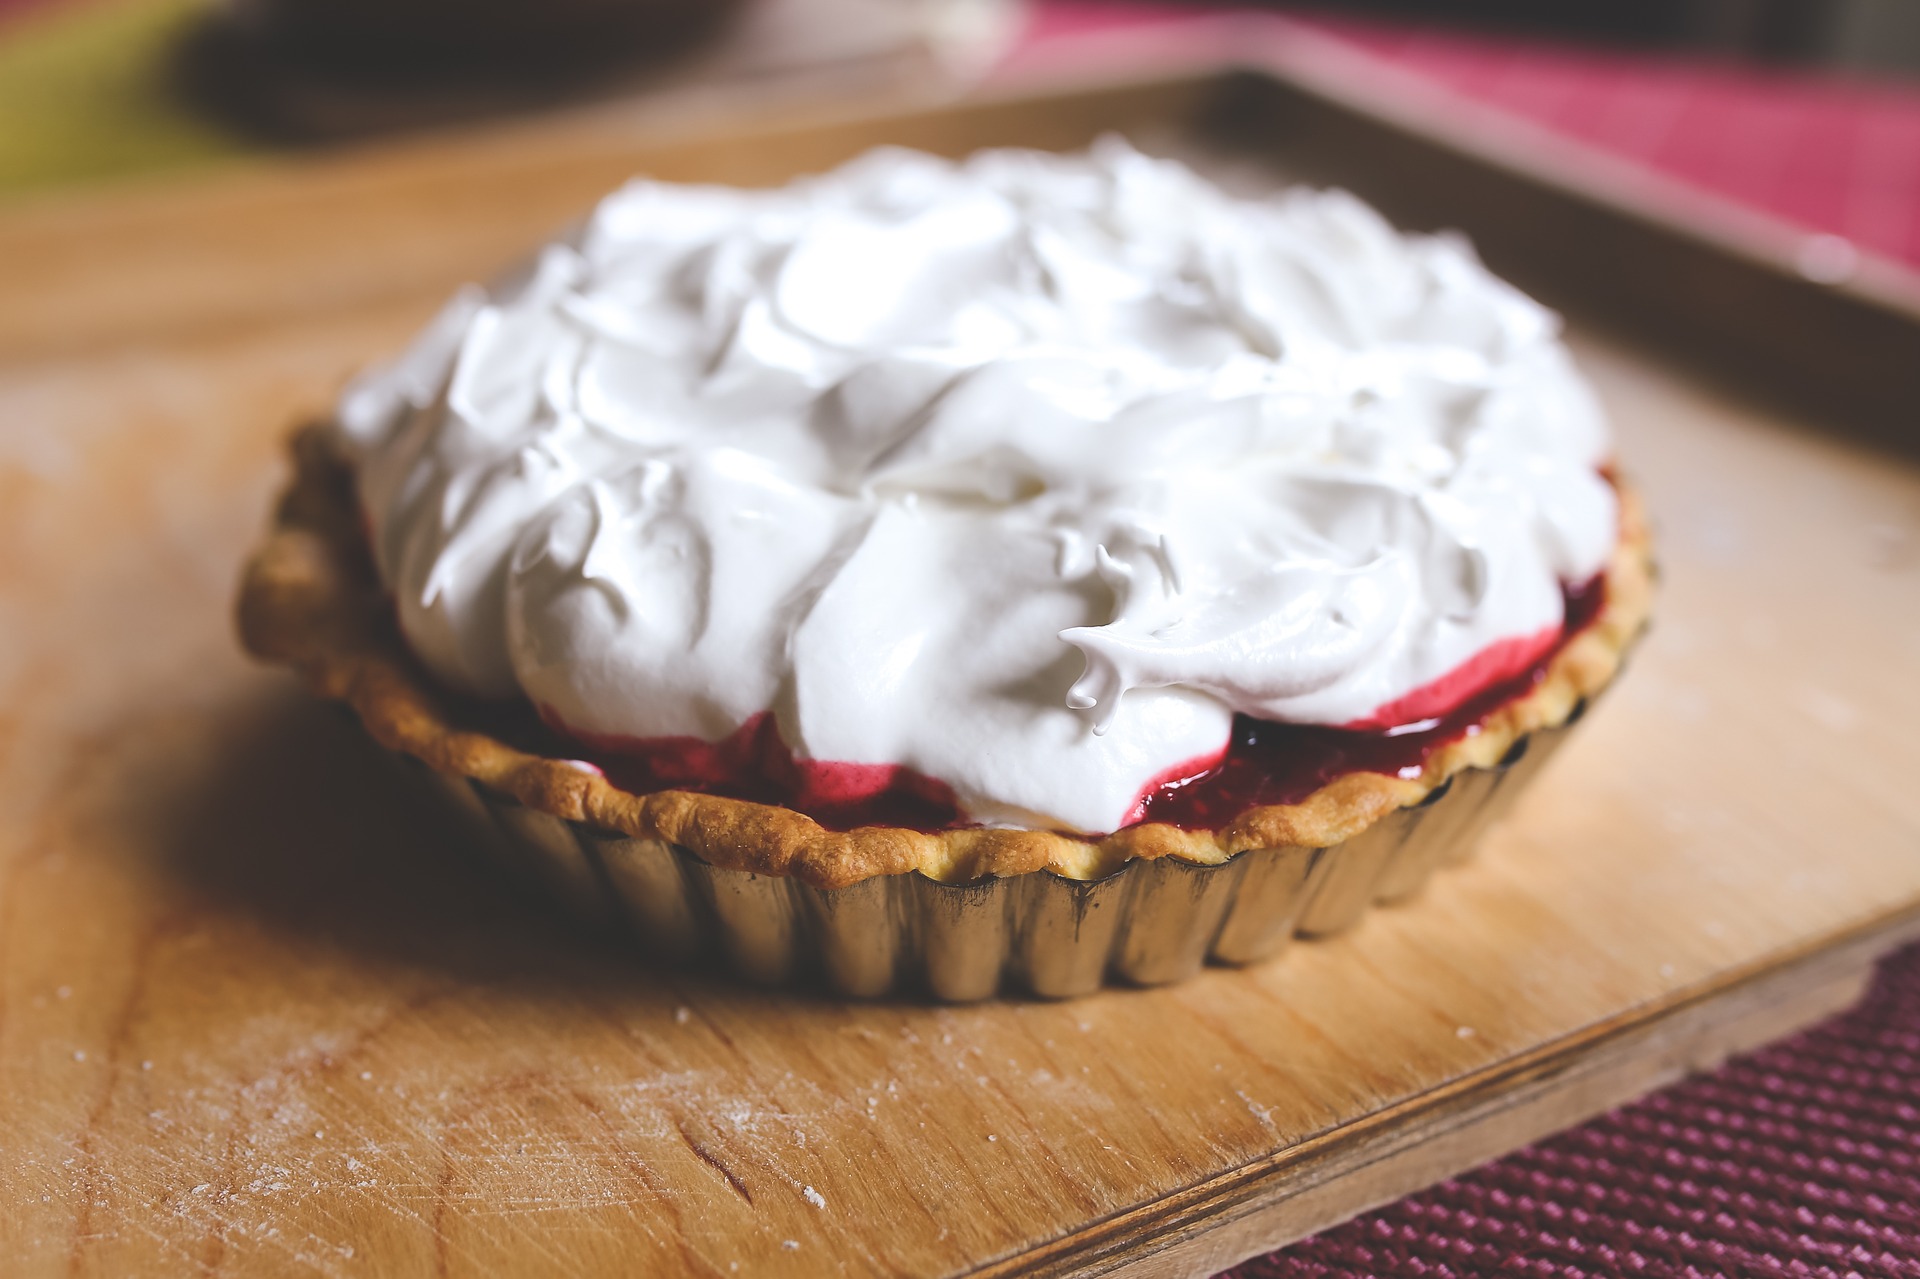 A pie with cream topping sits on a wood table